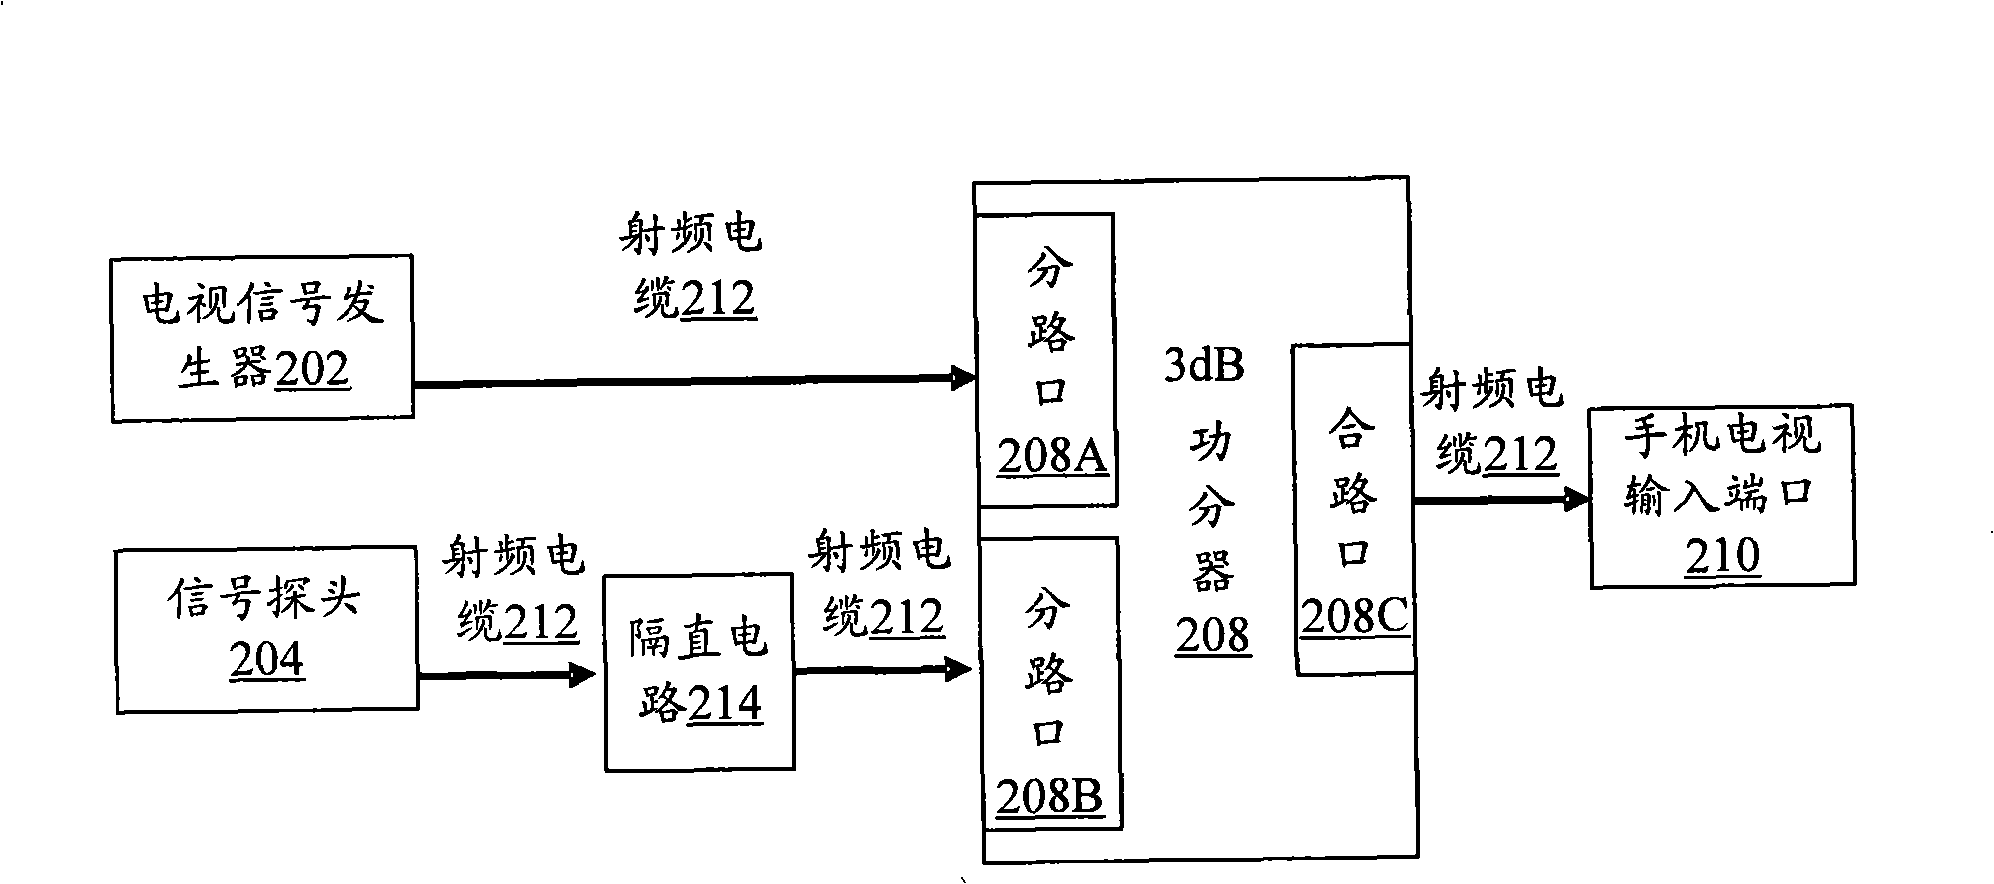 Testing device and debugging method for coupling sensitivity of mobile terminal